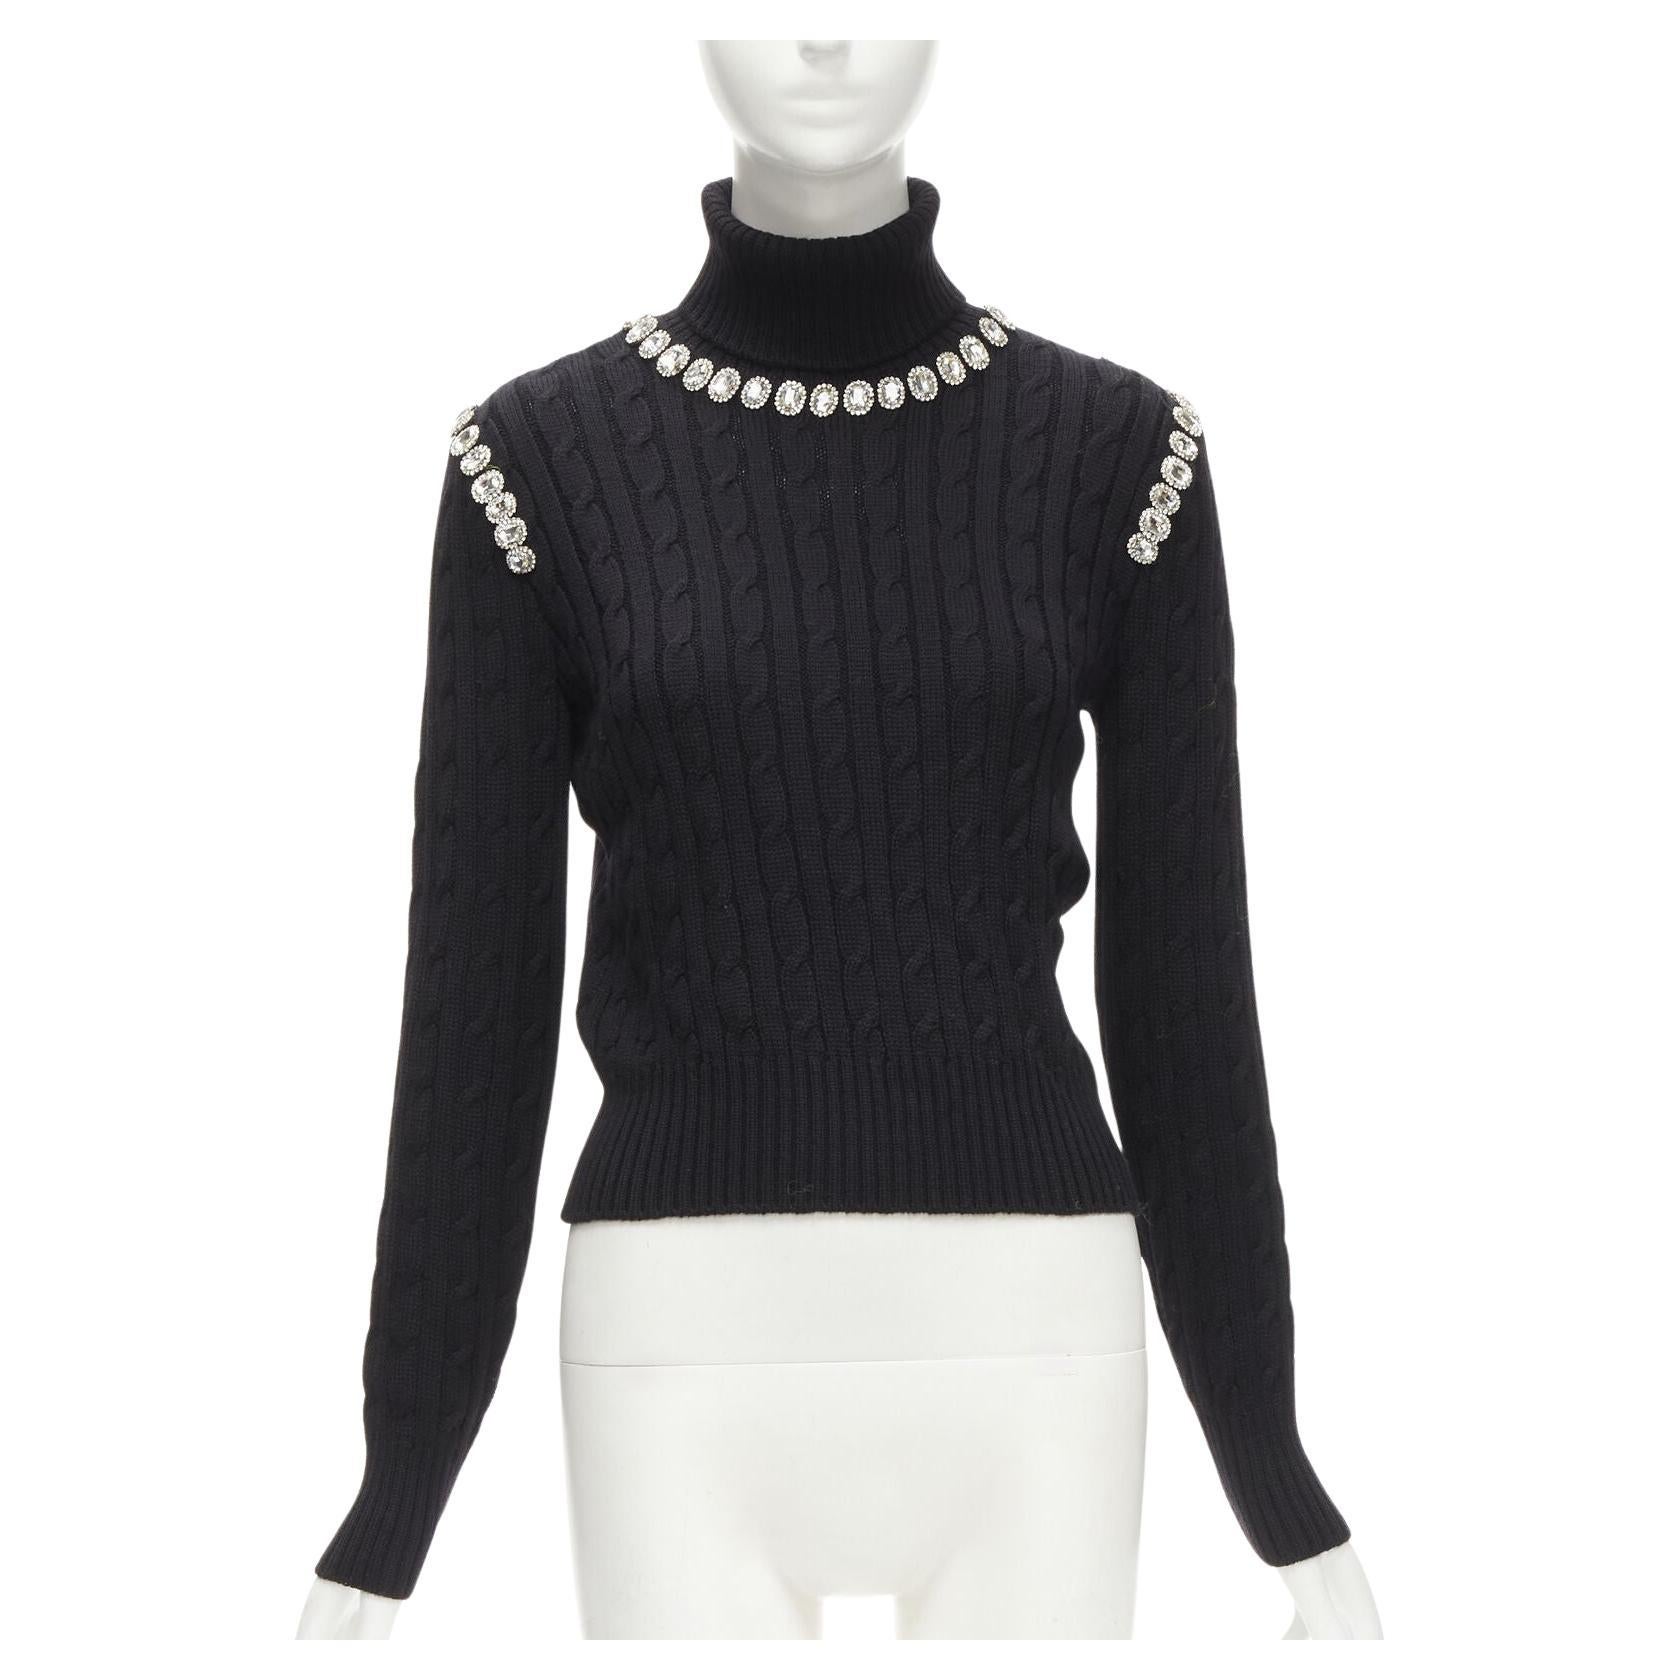 GIUSEPPE DI MORABITO black wool crystal embellished cable knit turtleneck IT38 For Sale